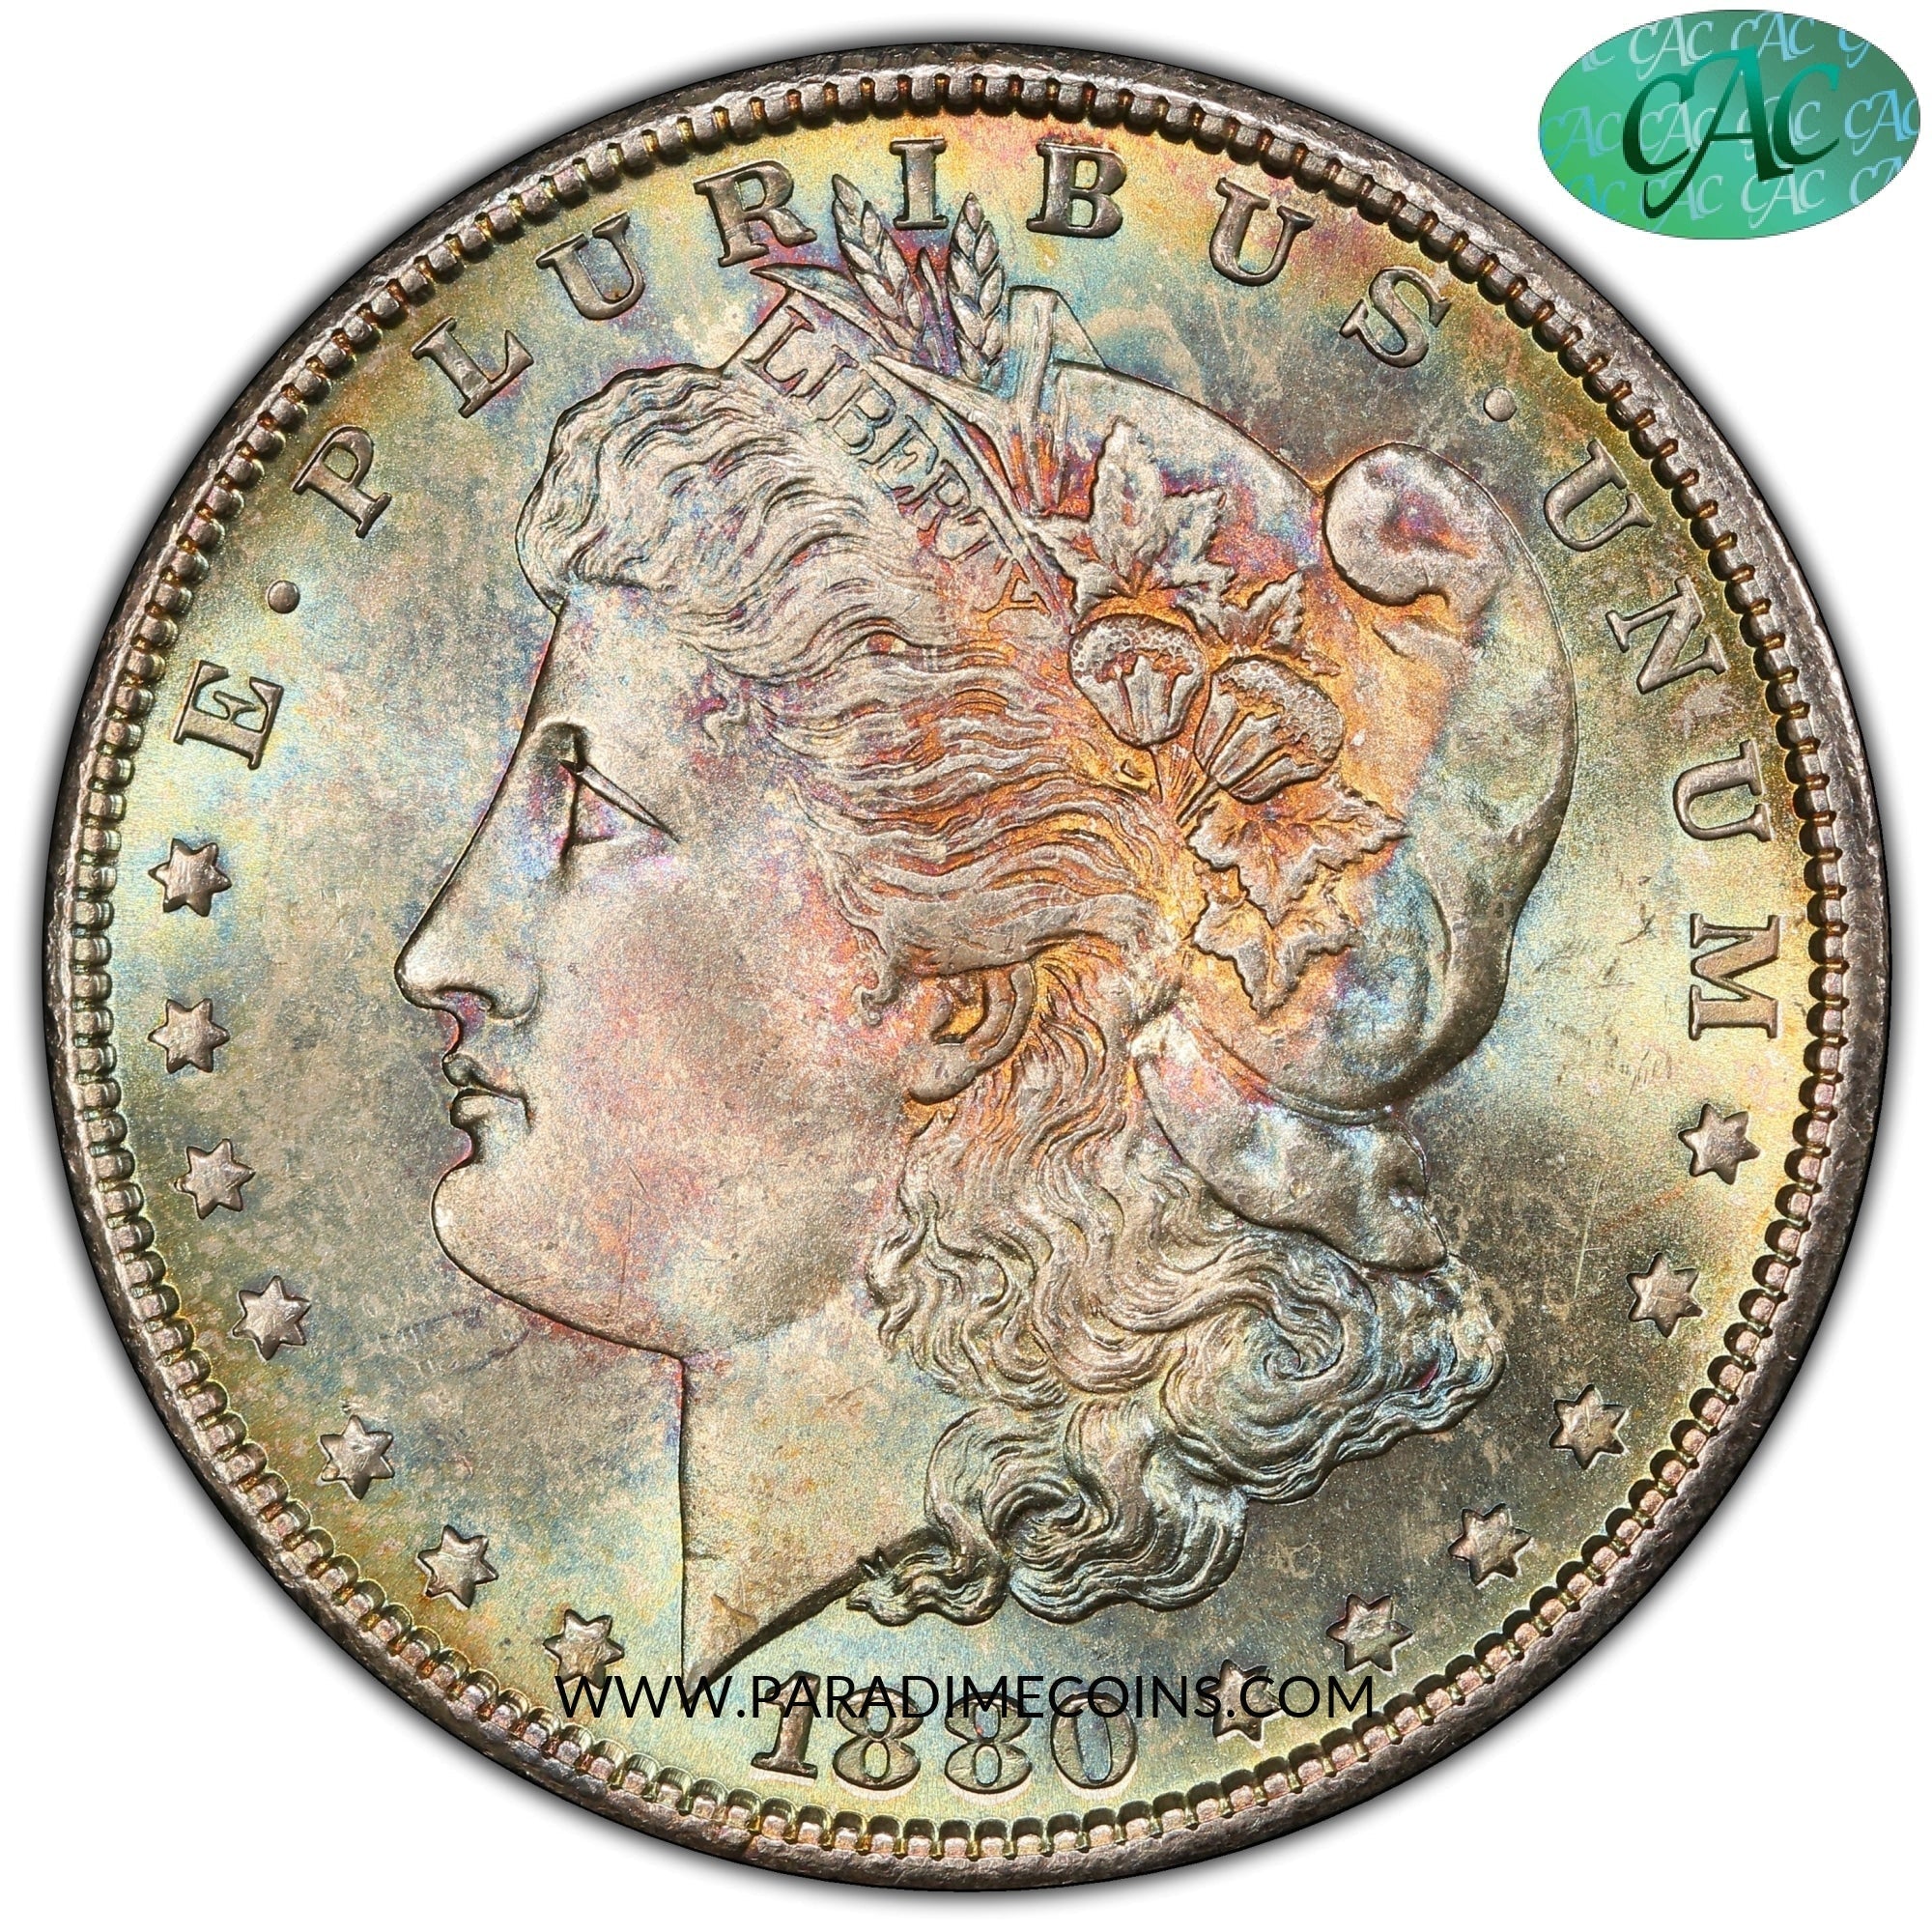 1880-S $1 MS67 PCGS CAC - Paradime Coins | PCGS NGC CACG CAC Rare US Numismatic Coins For Sale